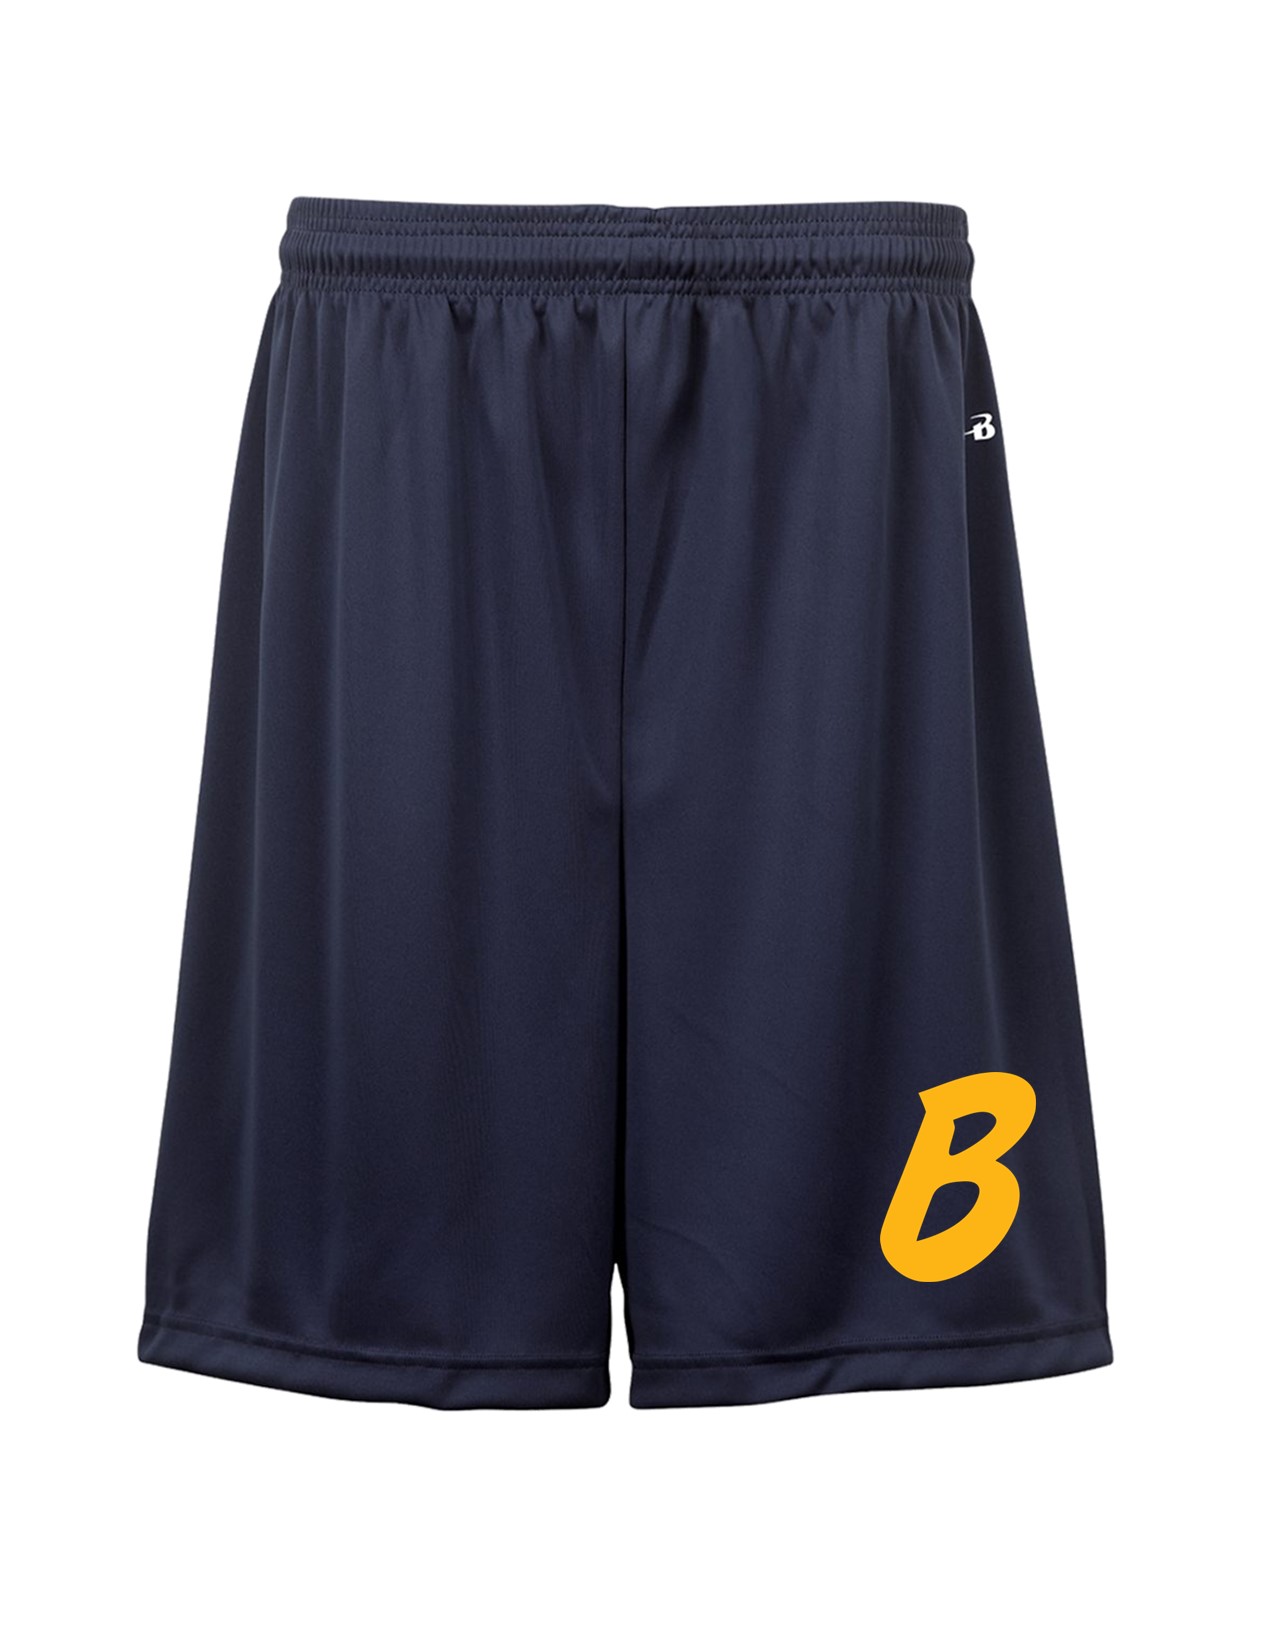 85 Badger 4107 Adult B-Core 7 Inch Inseam Short with Front Print